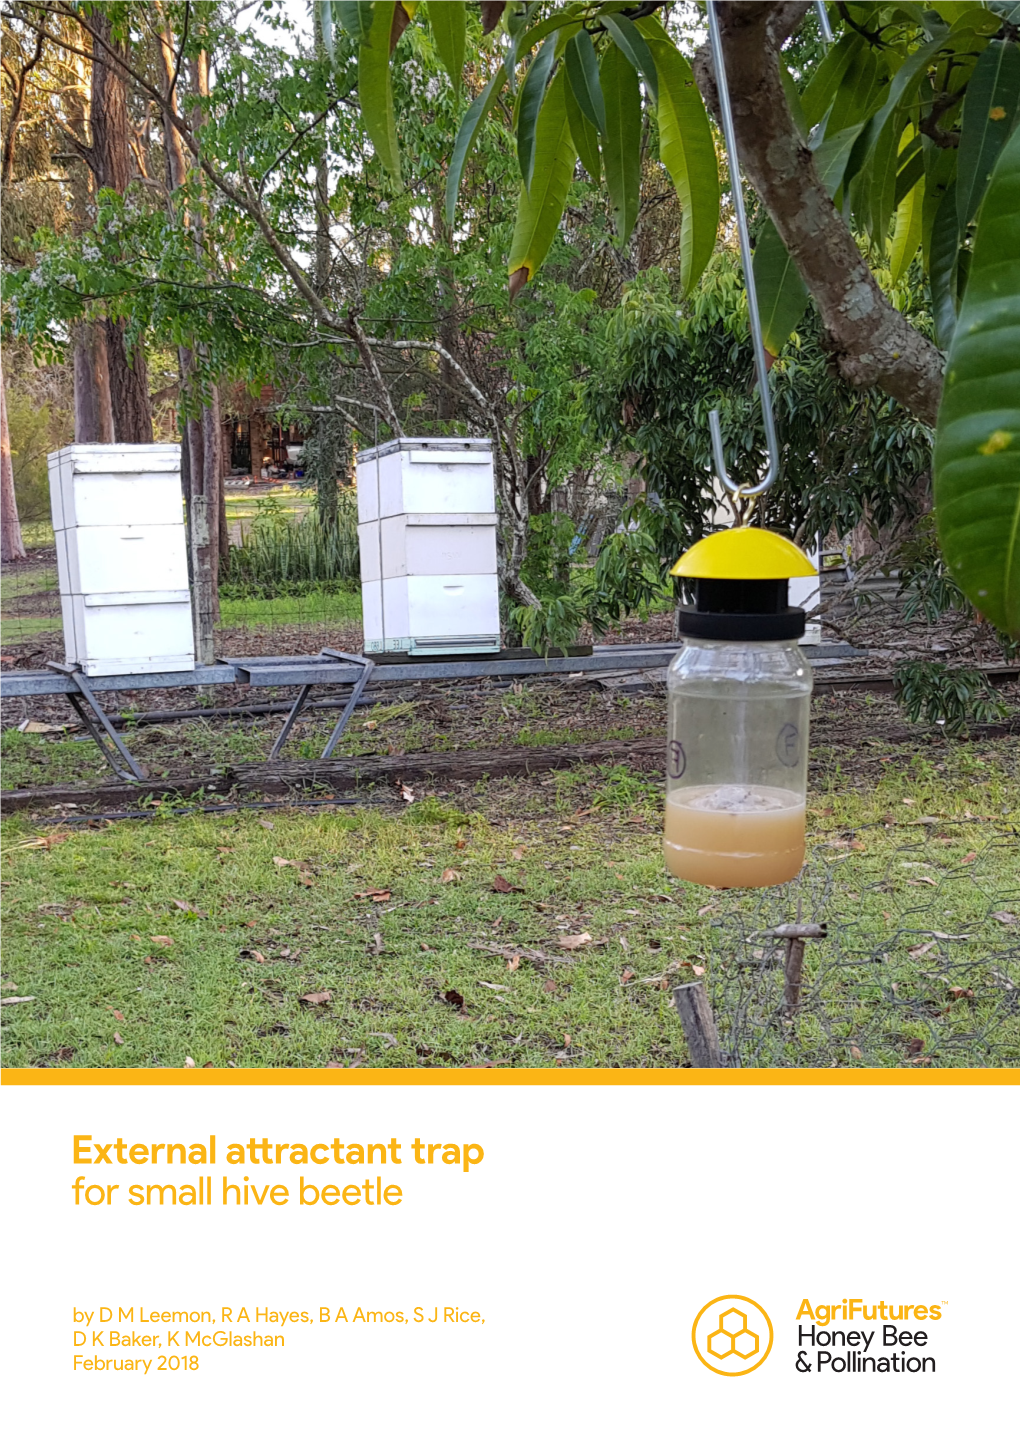 The Small Hive Beetle Trap